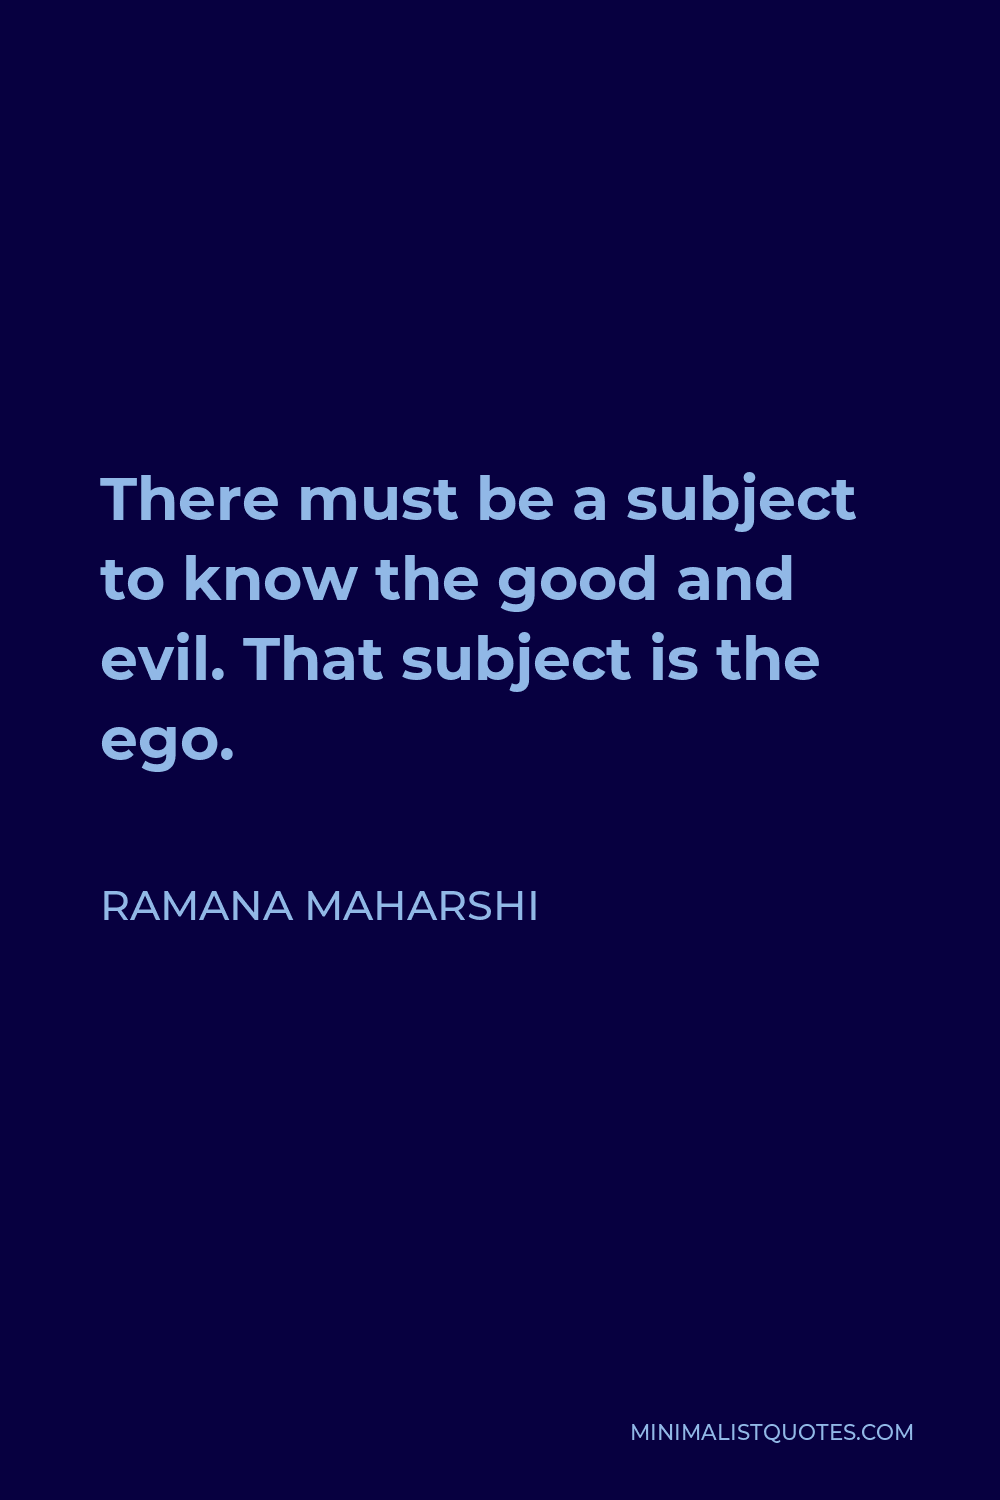 Ramana Maharshi Quote - There must be a subject to know the good and evil. That subject is the ego.